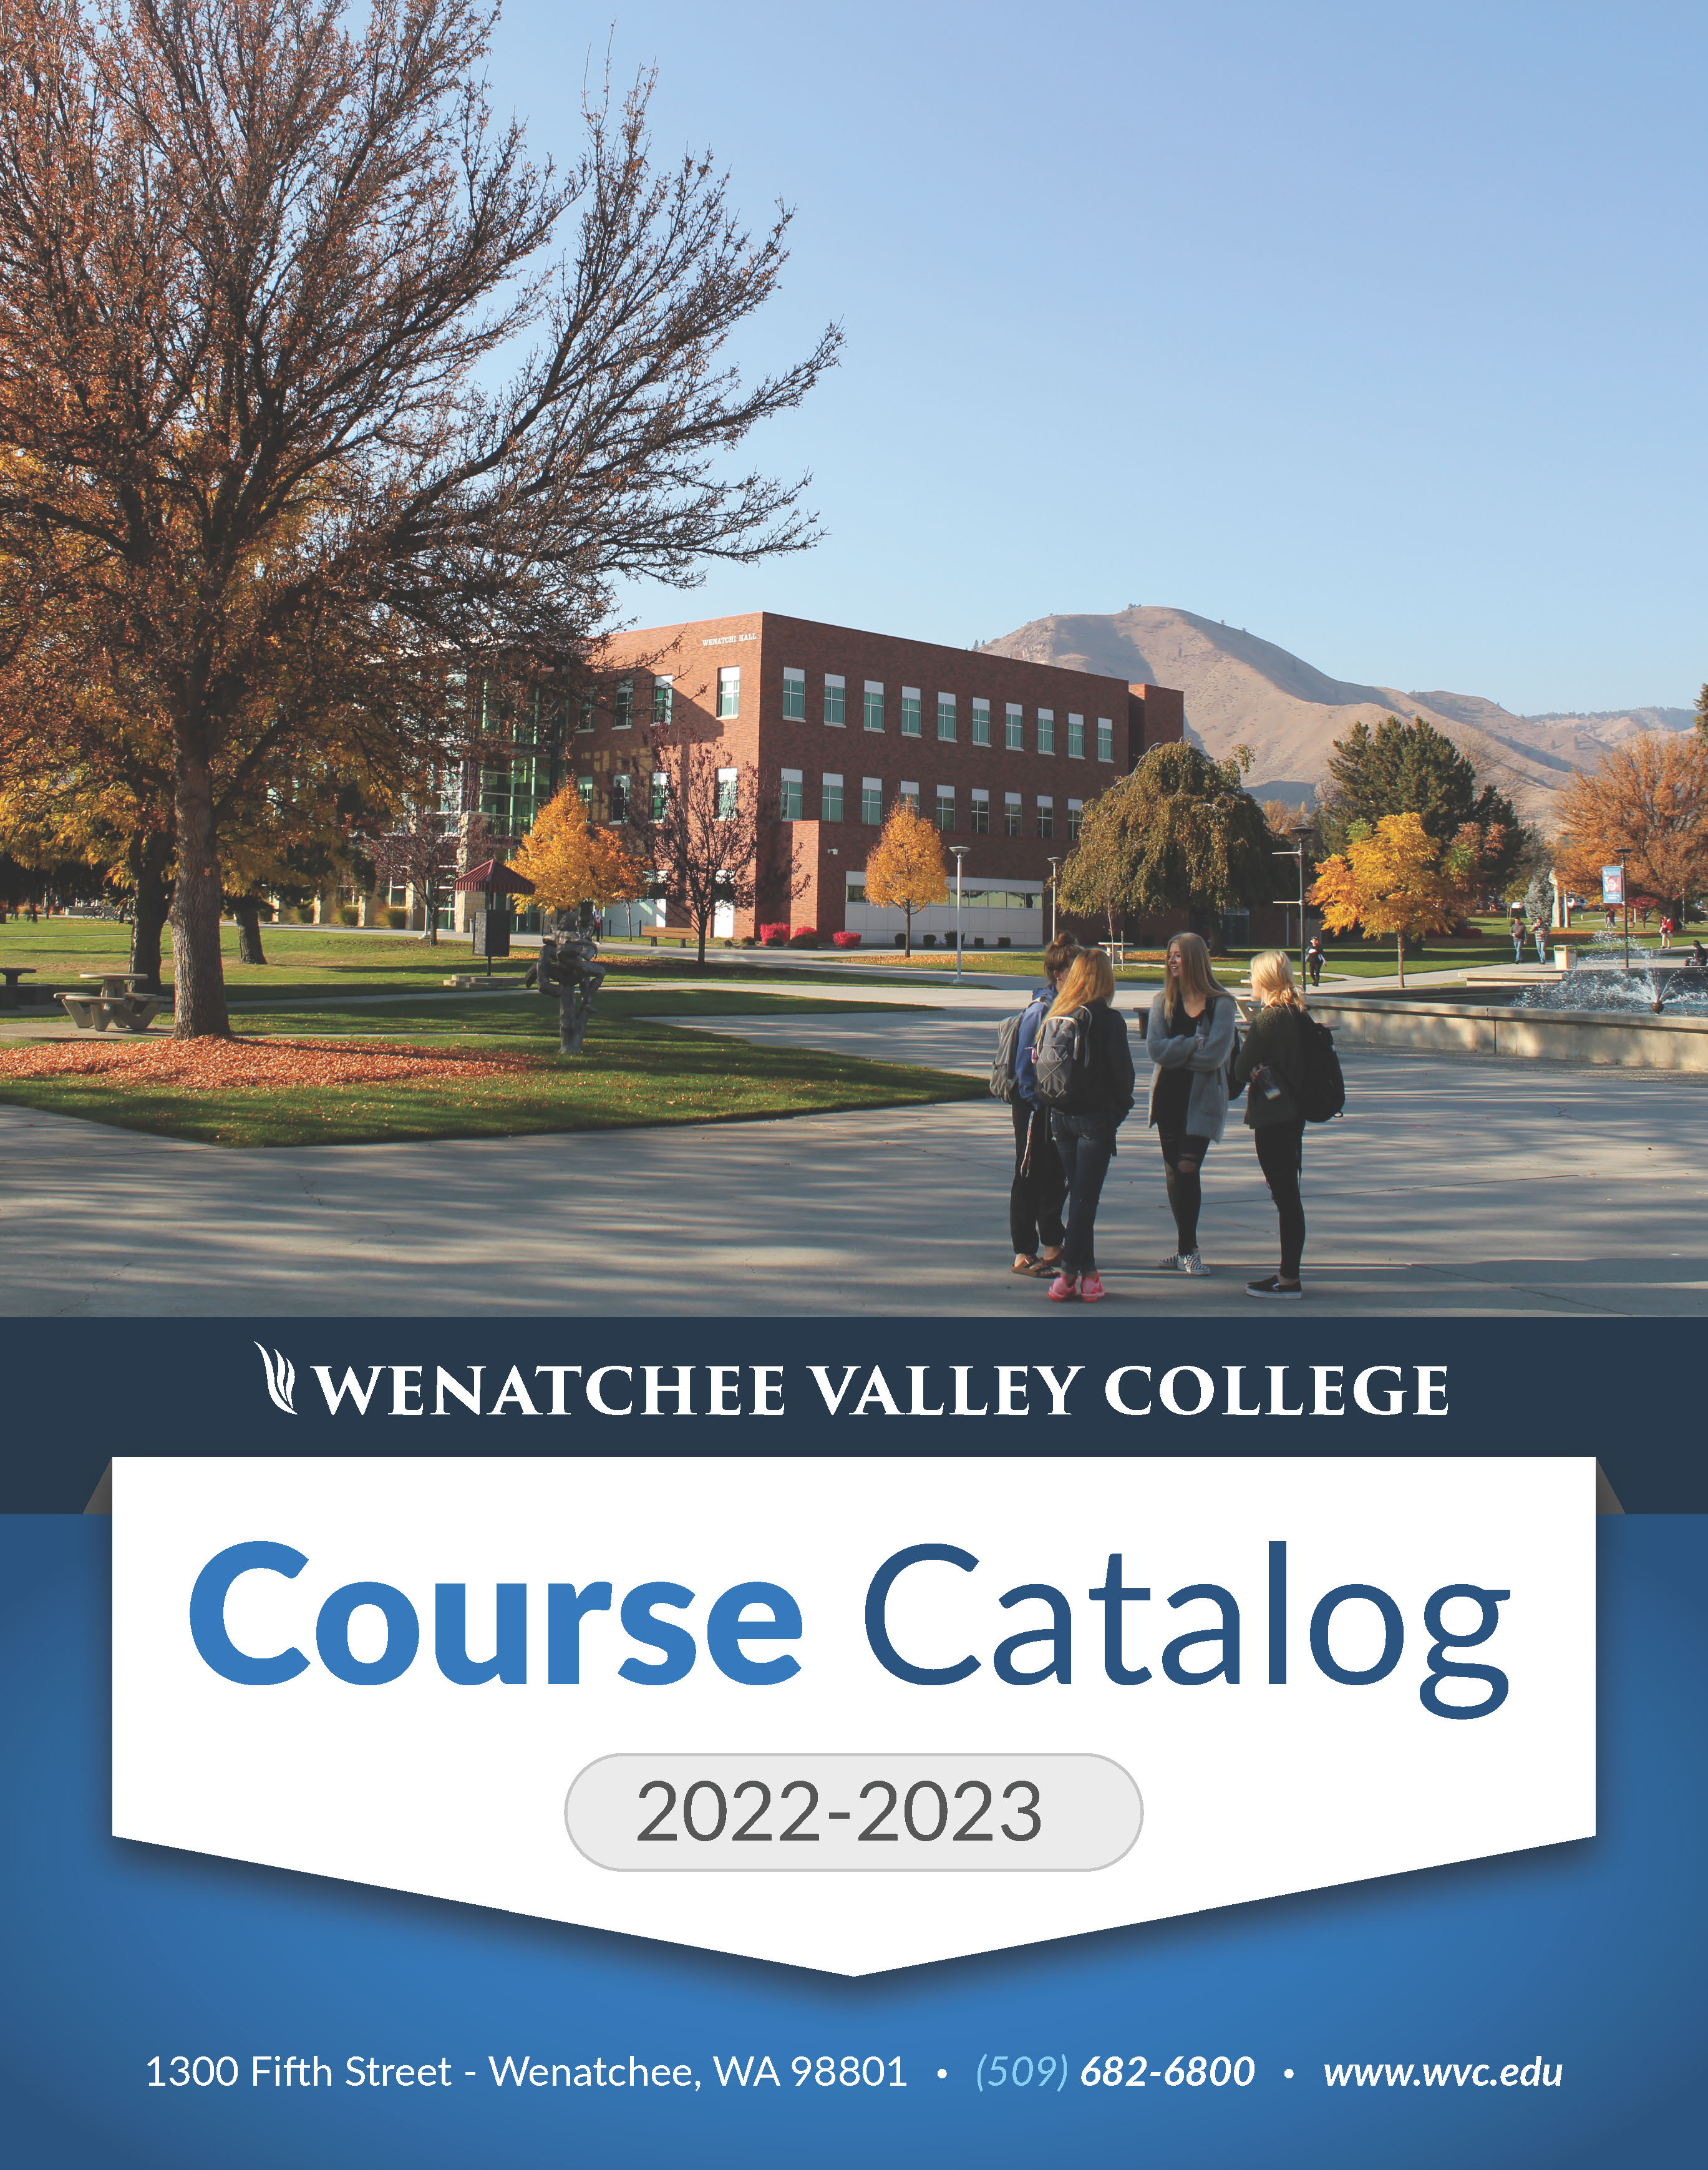 Catalog cover image with text that says "Wenatchee Valley College Catalog 2022-2023"